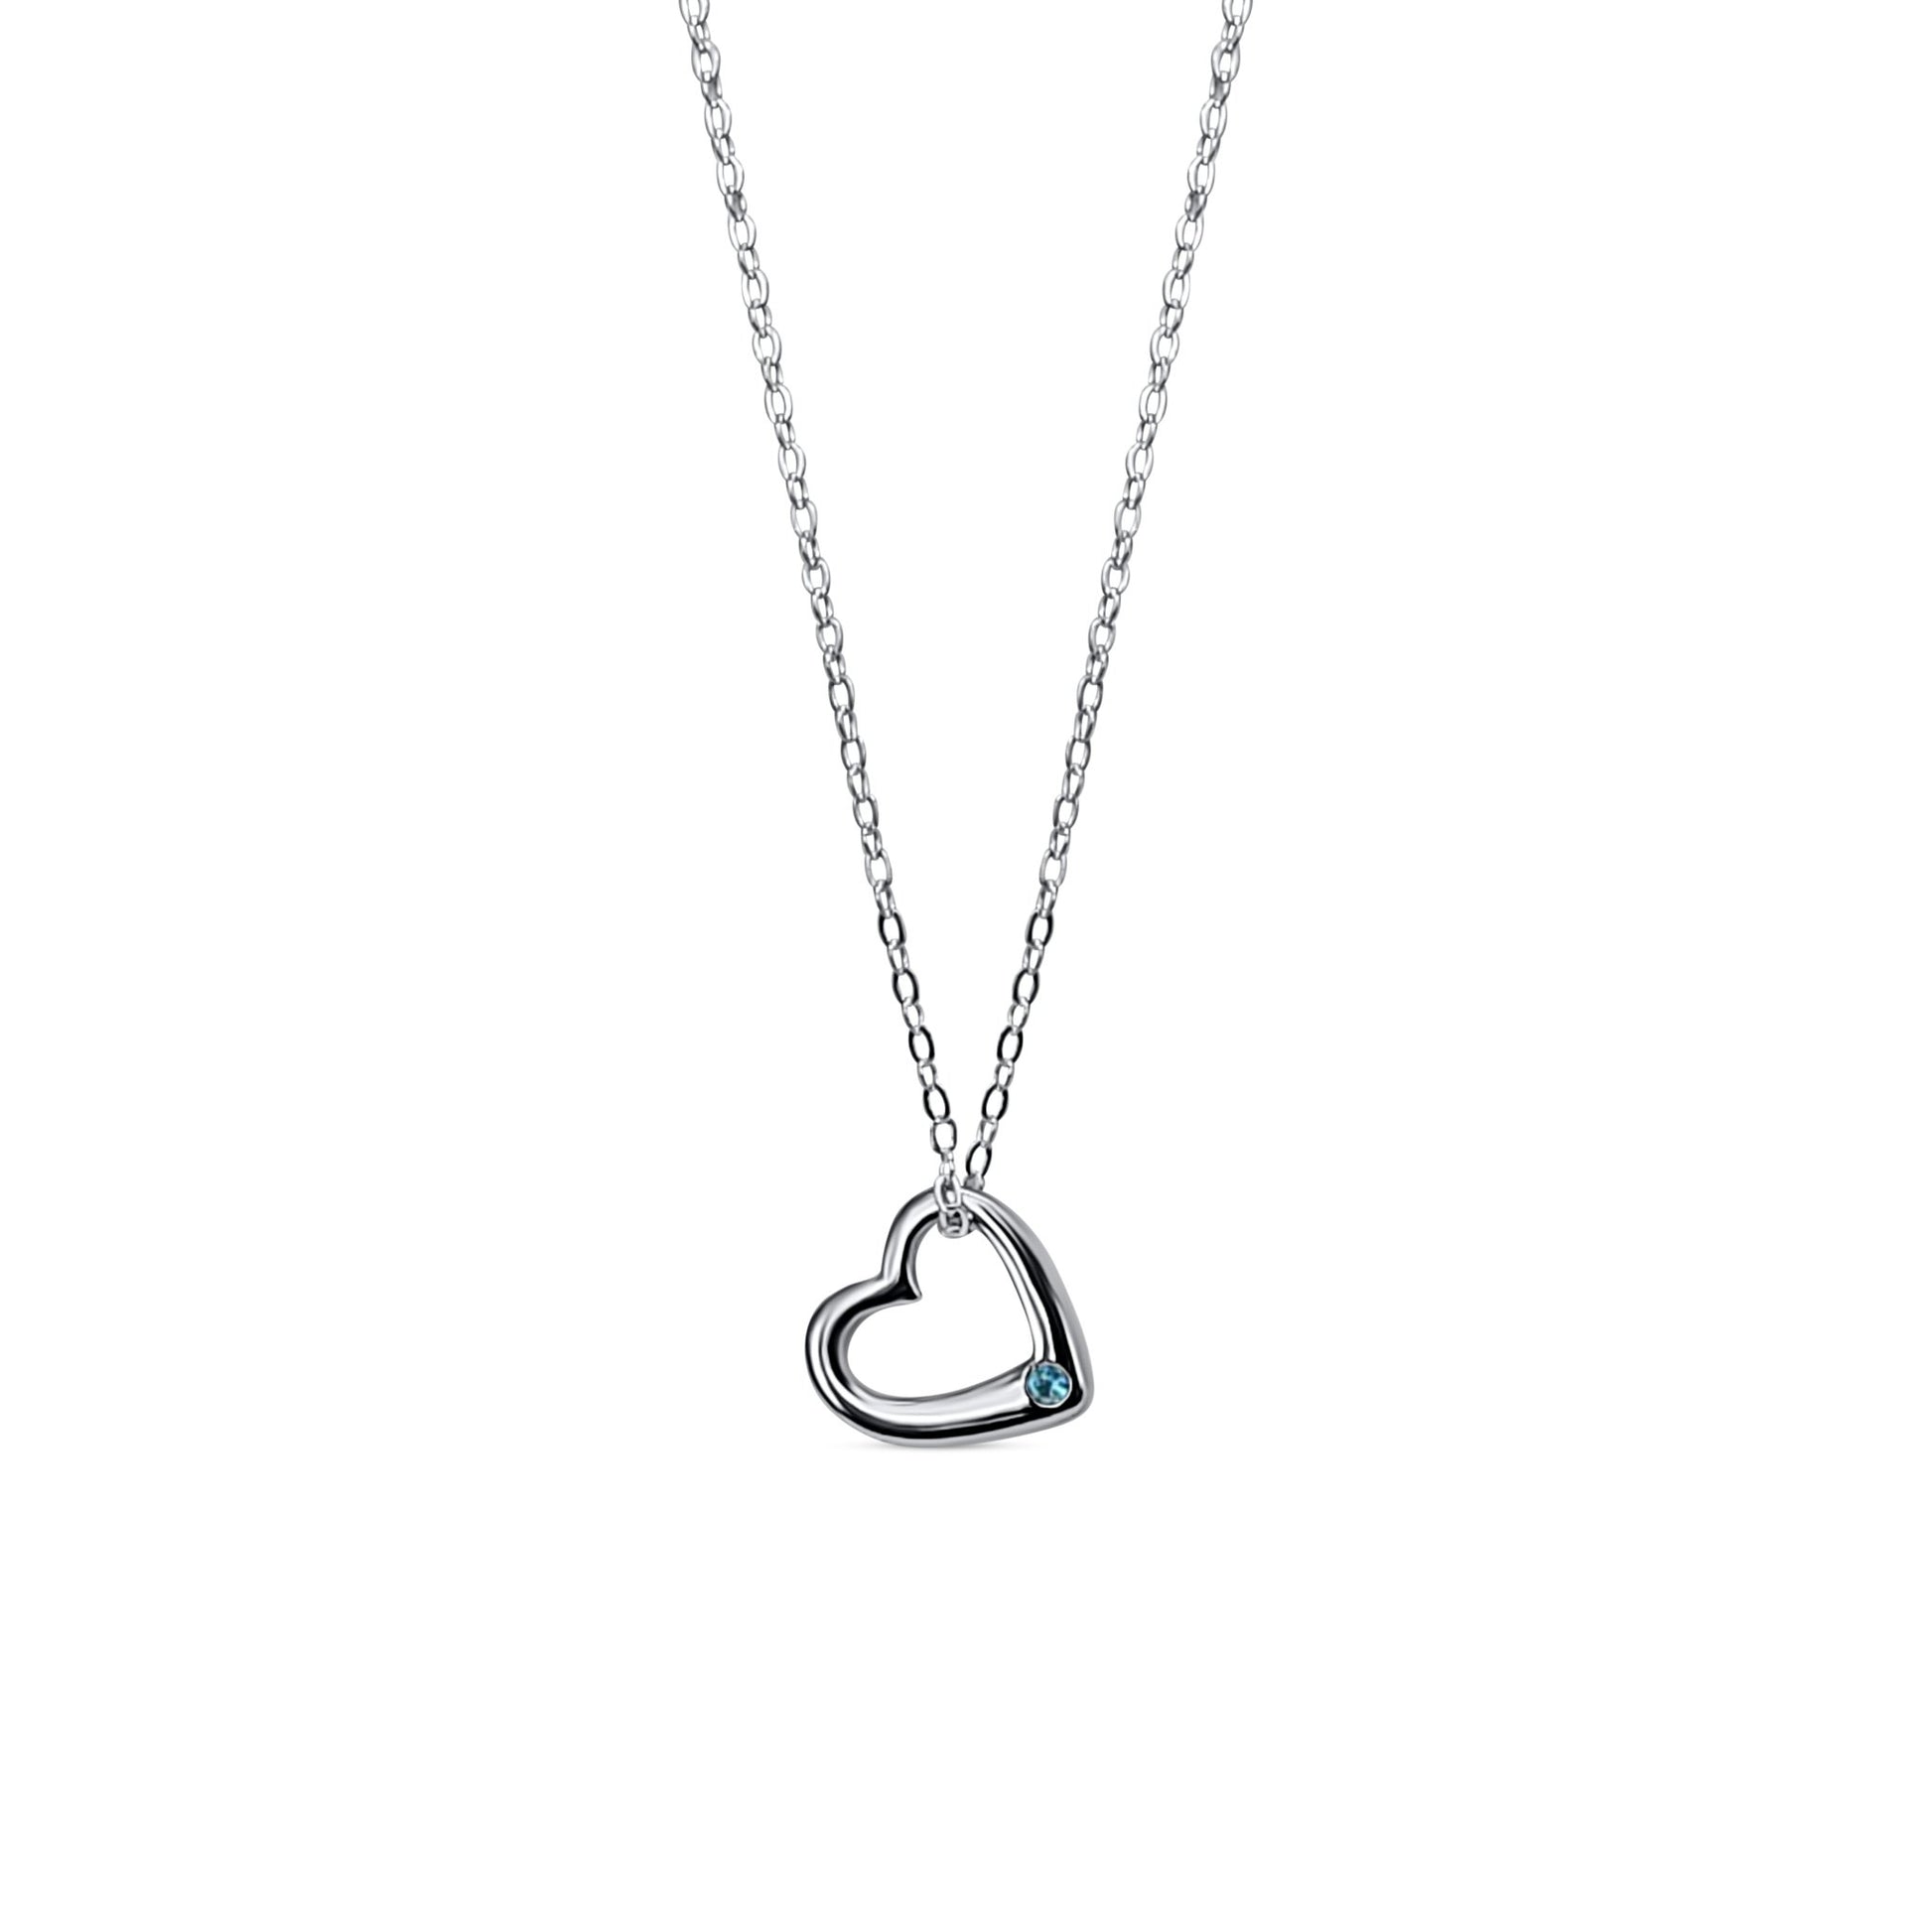 silver heart pendant with natural blue topaz gemstone on chain necklace